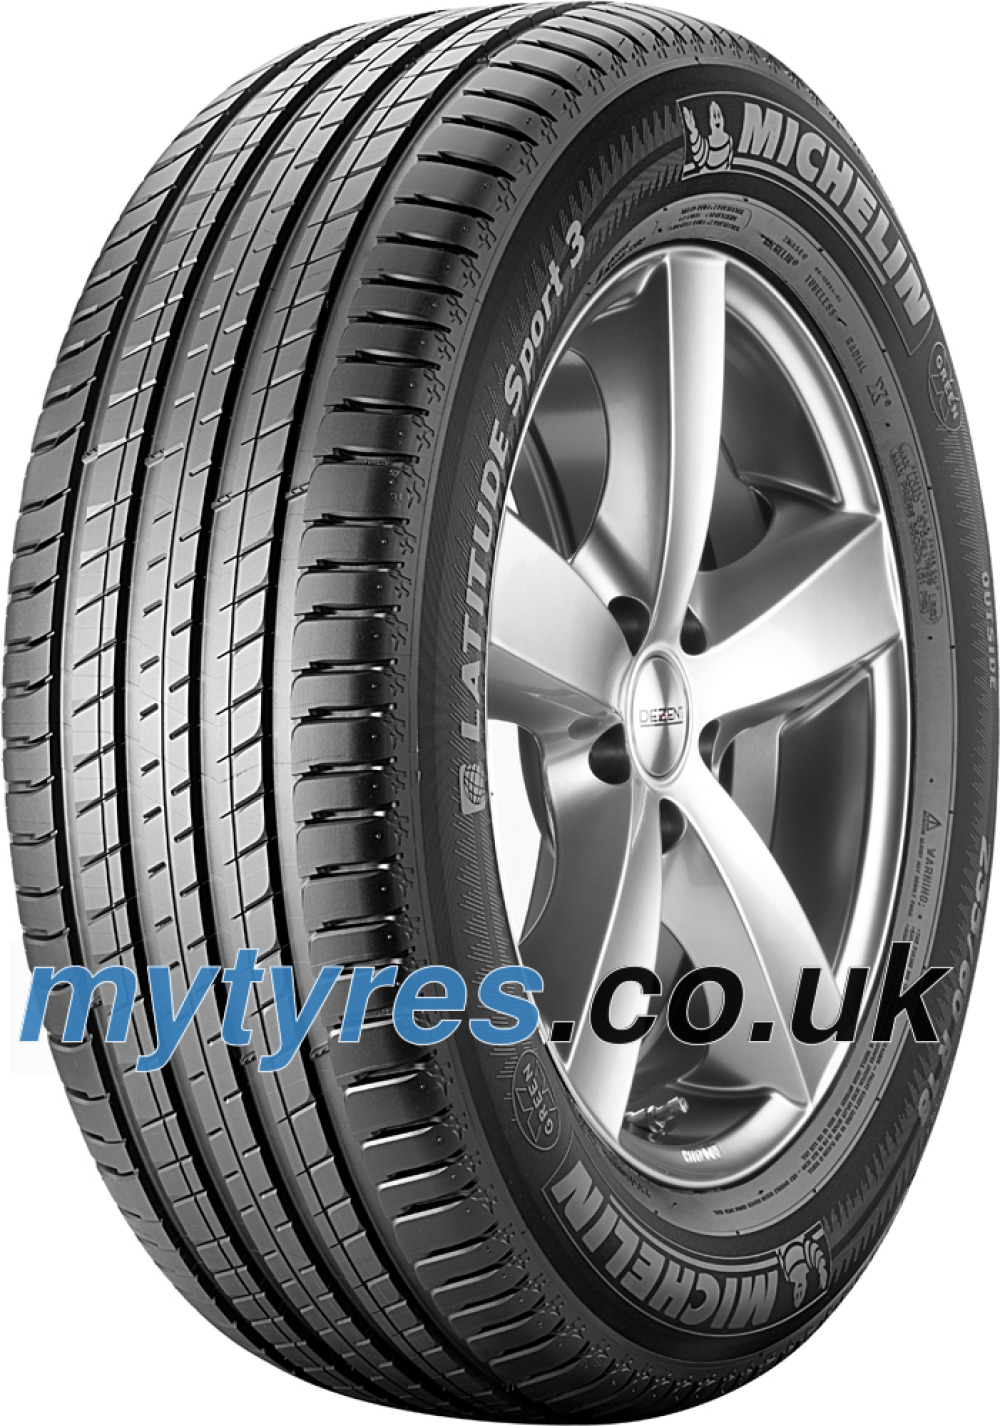 product image of Michelin Latitude Sport 3 ( 255/45 R20 105V XL Acoustic, VOL )